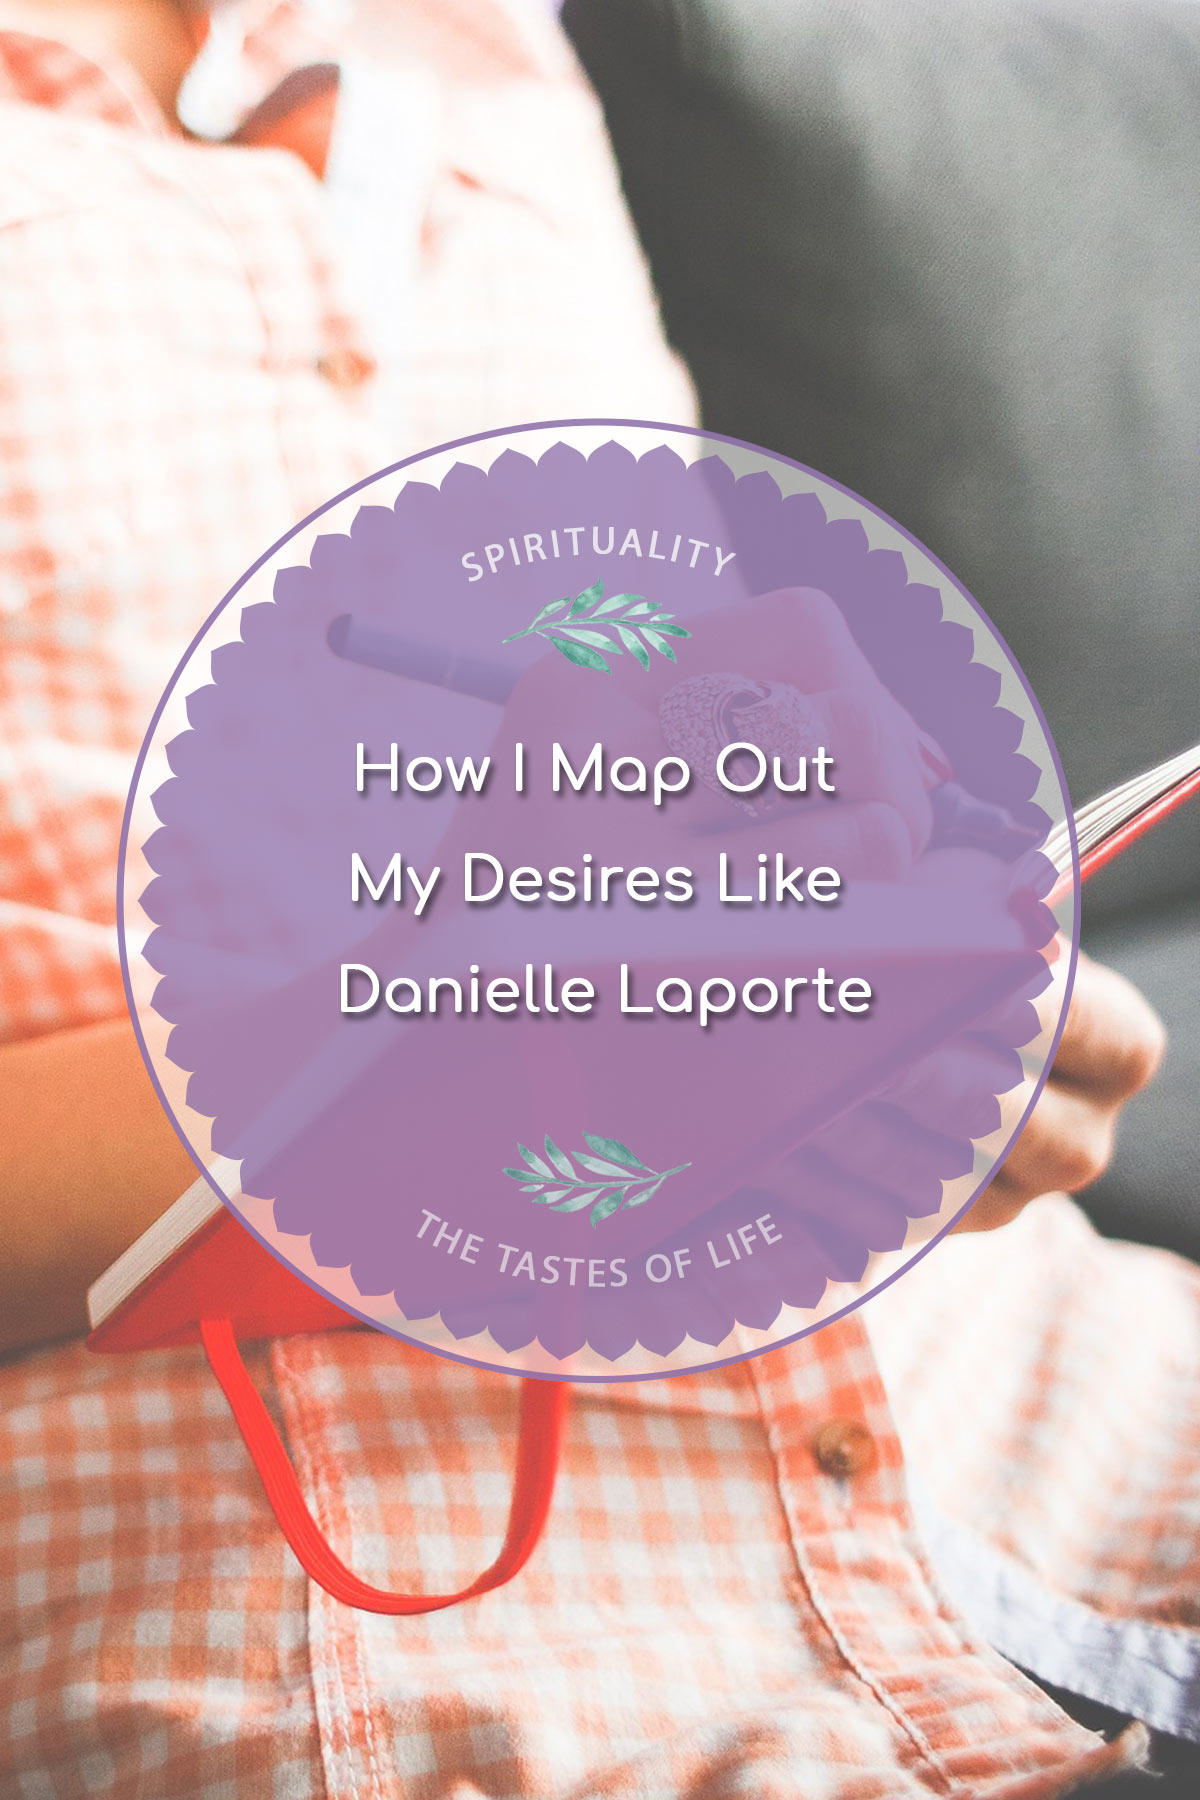 How I Map Out My Desires Like Danielle Laporte